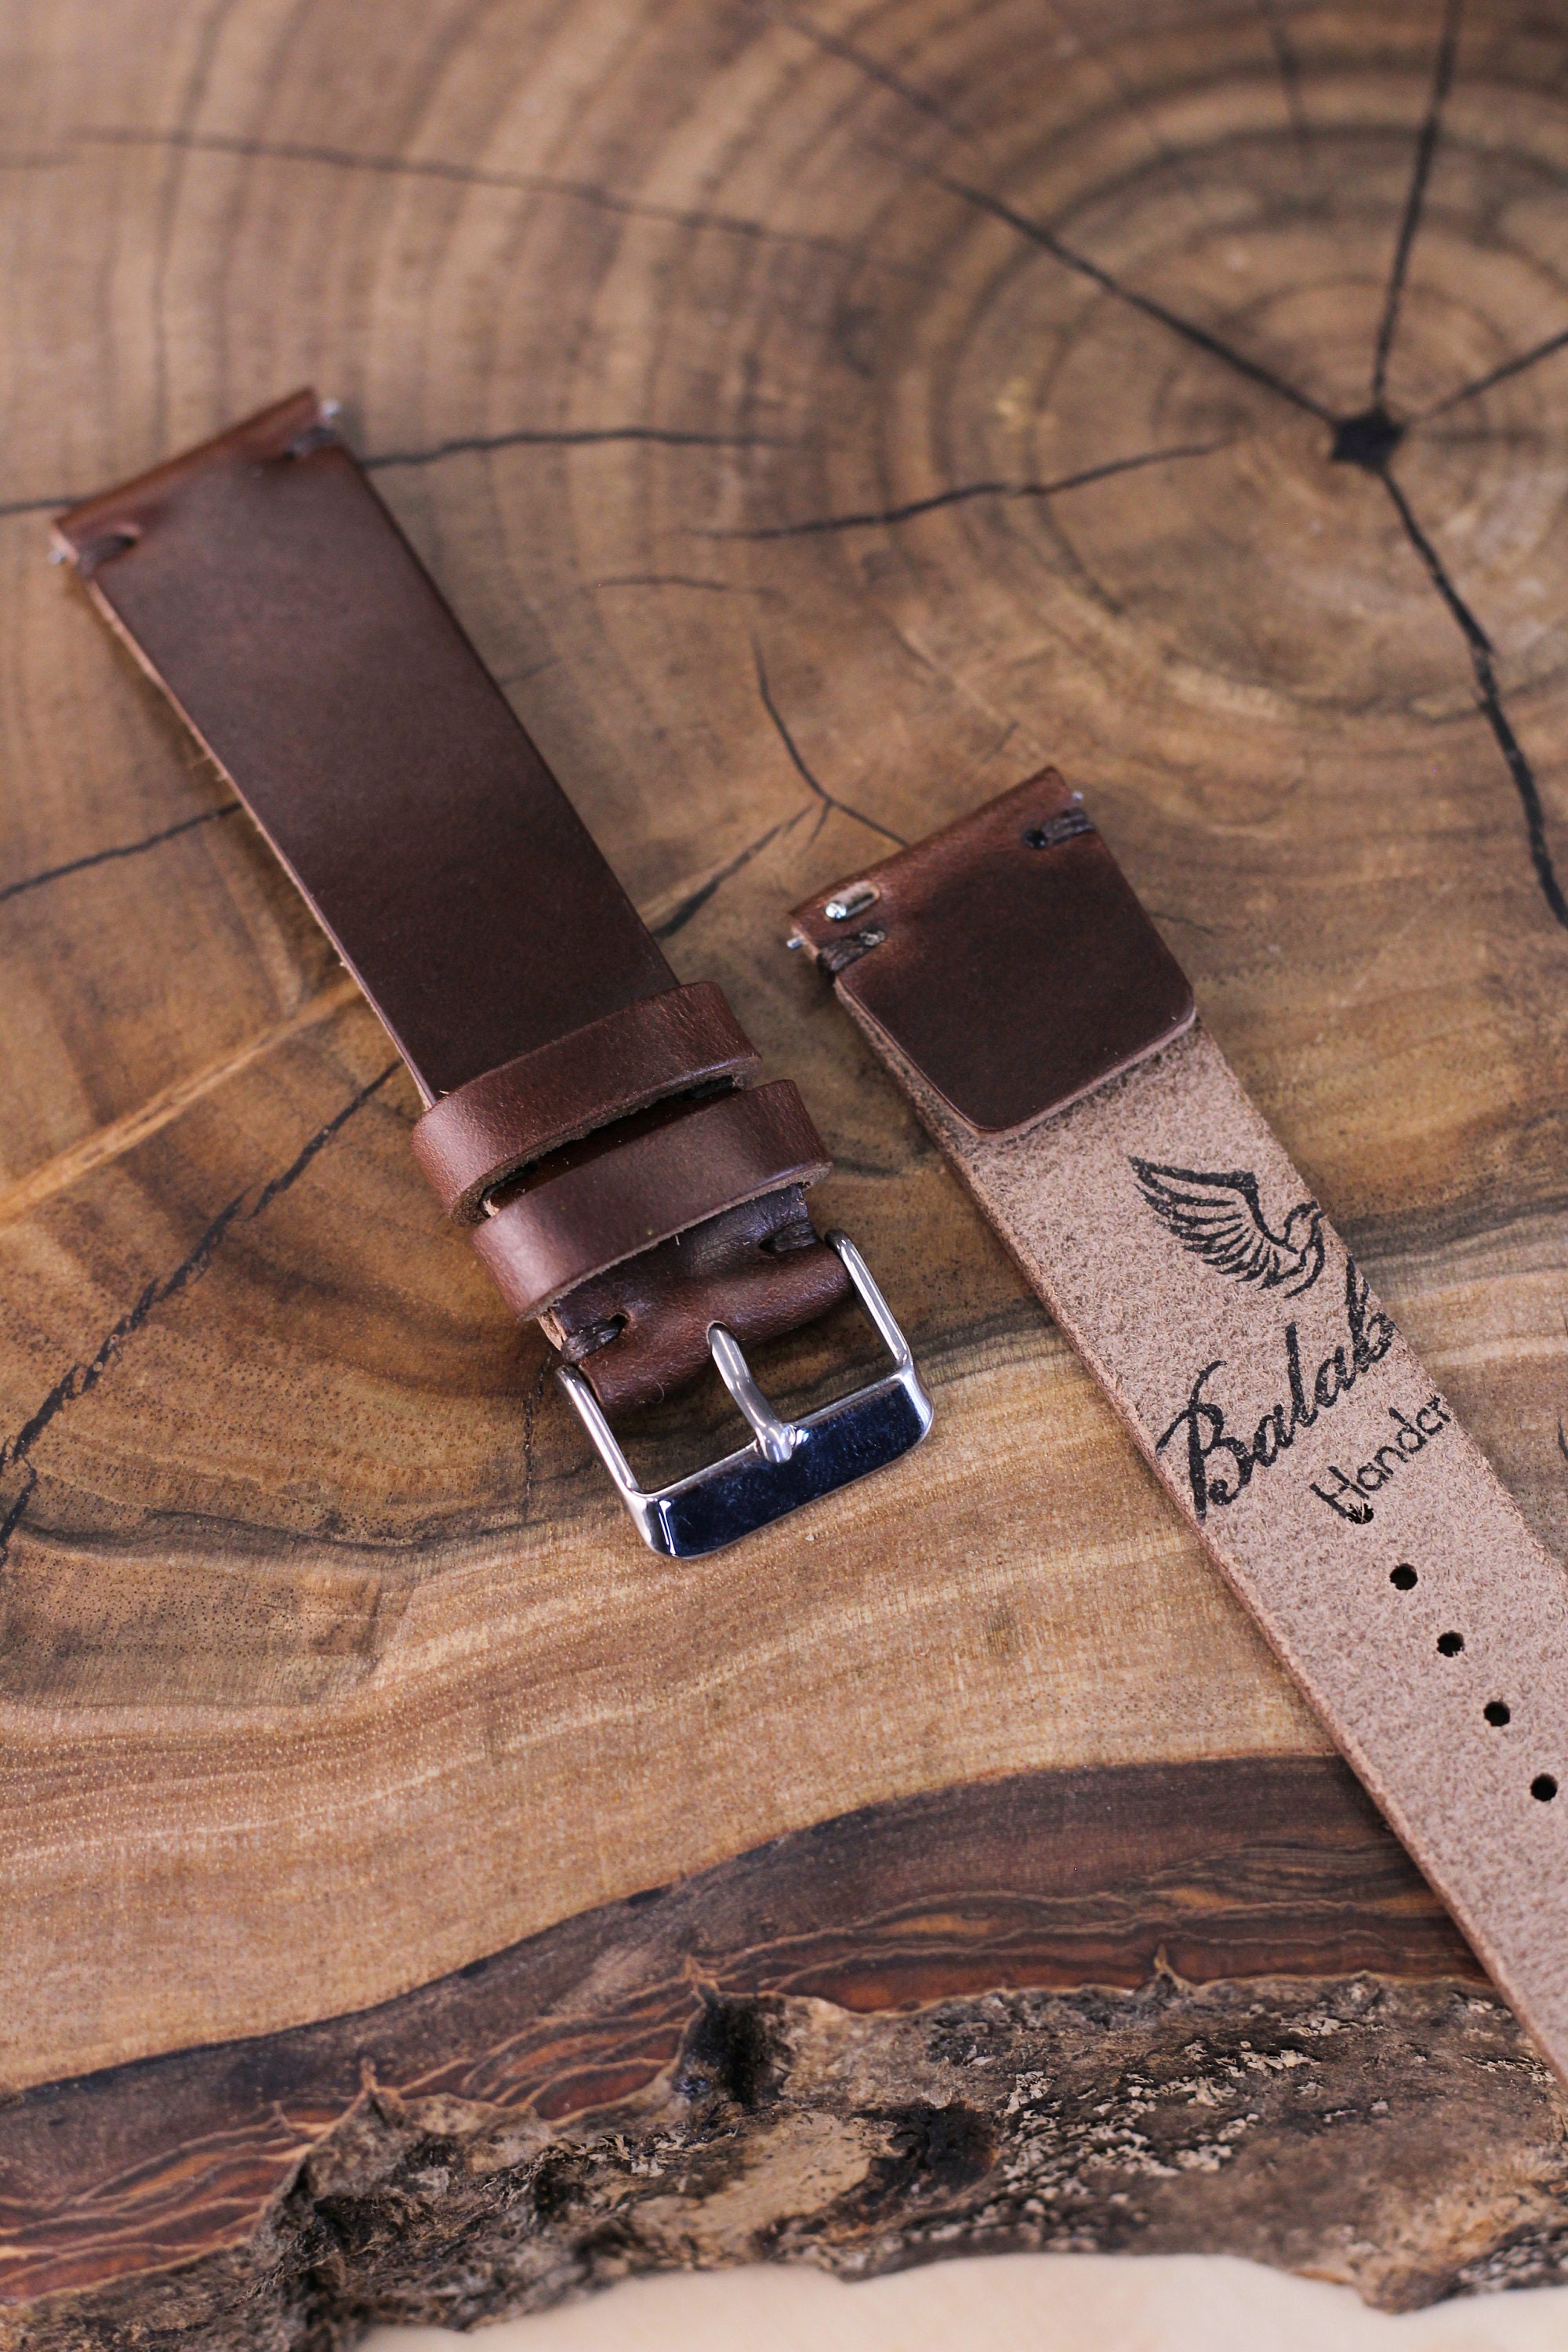 100% - / Buy Layer India Online Leather 18 Mm, Handmade Leather Horween Strap Sized Watch Mm, Chromexcel Brown 24 in Mm / 22 20 Etsy Strap Mm, /single Band Custom in